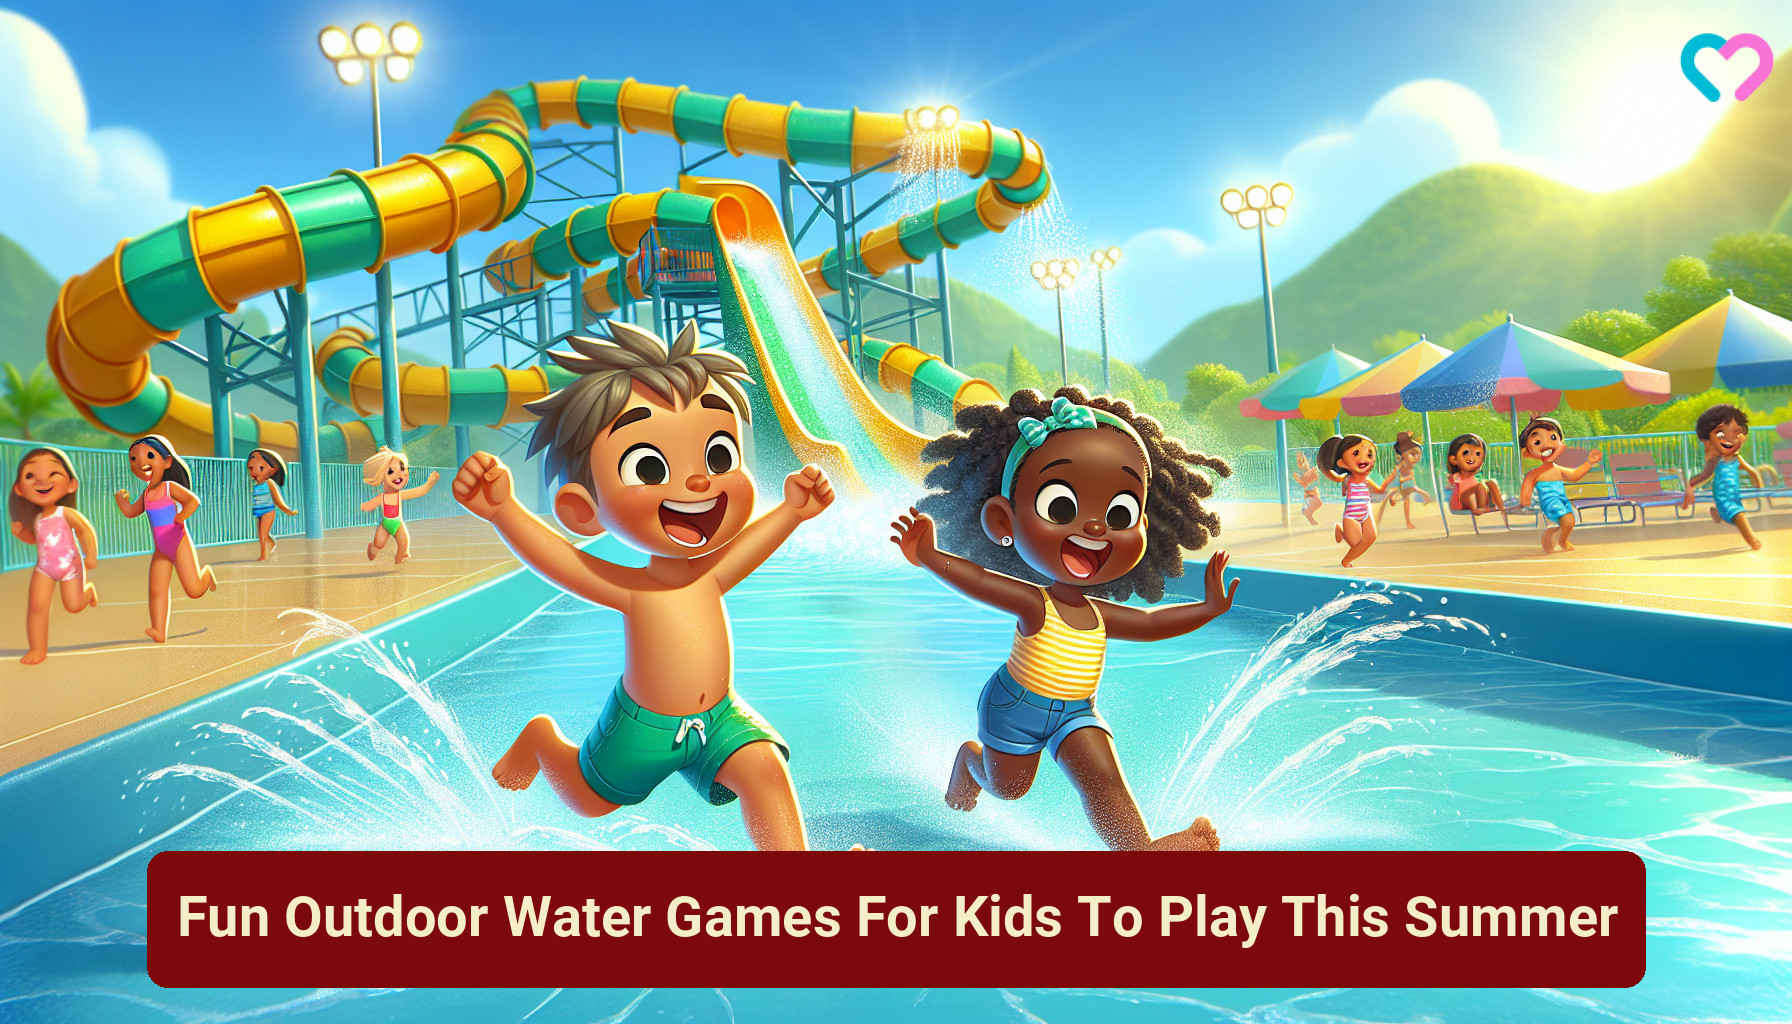 Outdoor Water Games For Kids_illustration